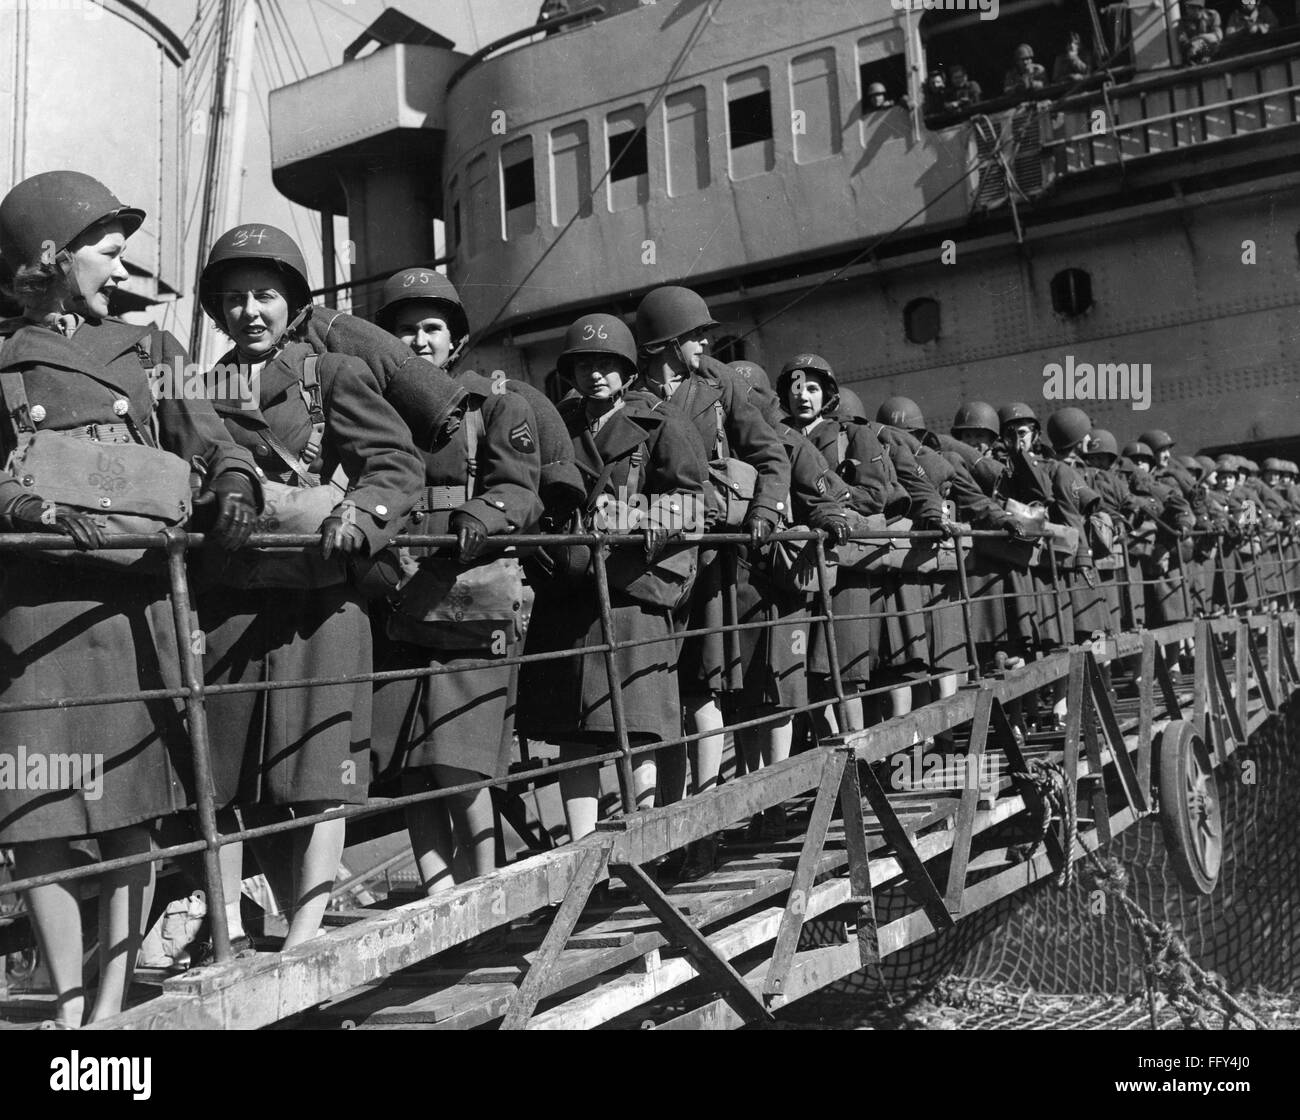 WWII: WOMEN'S ARMY CORPS. /nMembers of the Women's Army Corps disembark at a North African port during World War II. Among the first to land were Lenora Jones, Claire Justice and Martha Kerr. Photograph, 10 January 1944. Stock Photo